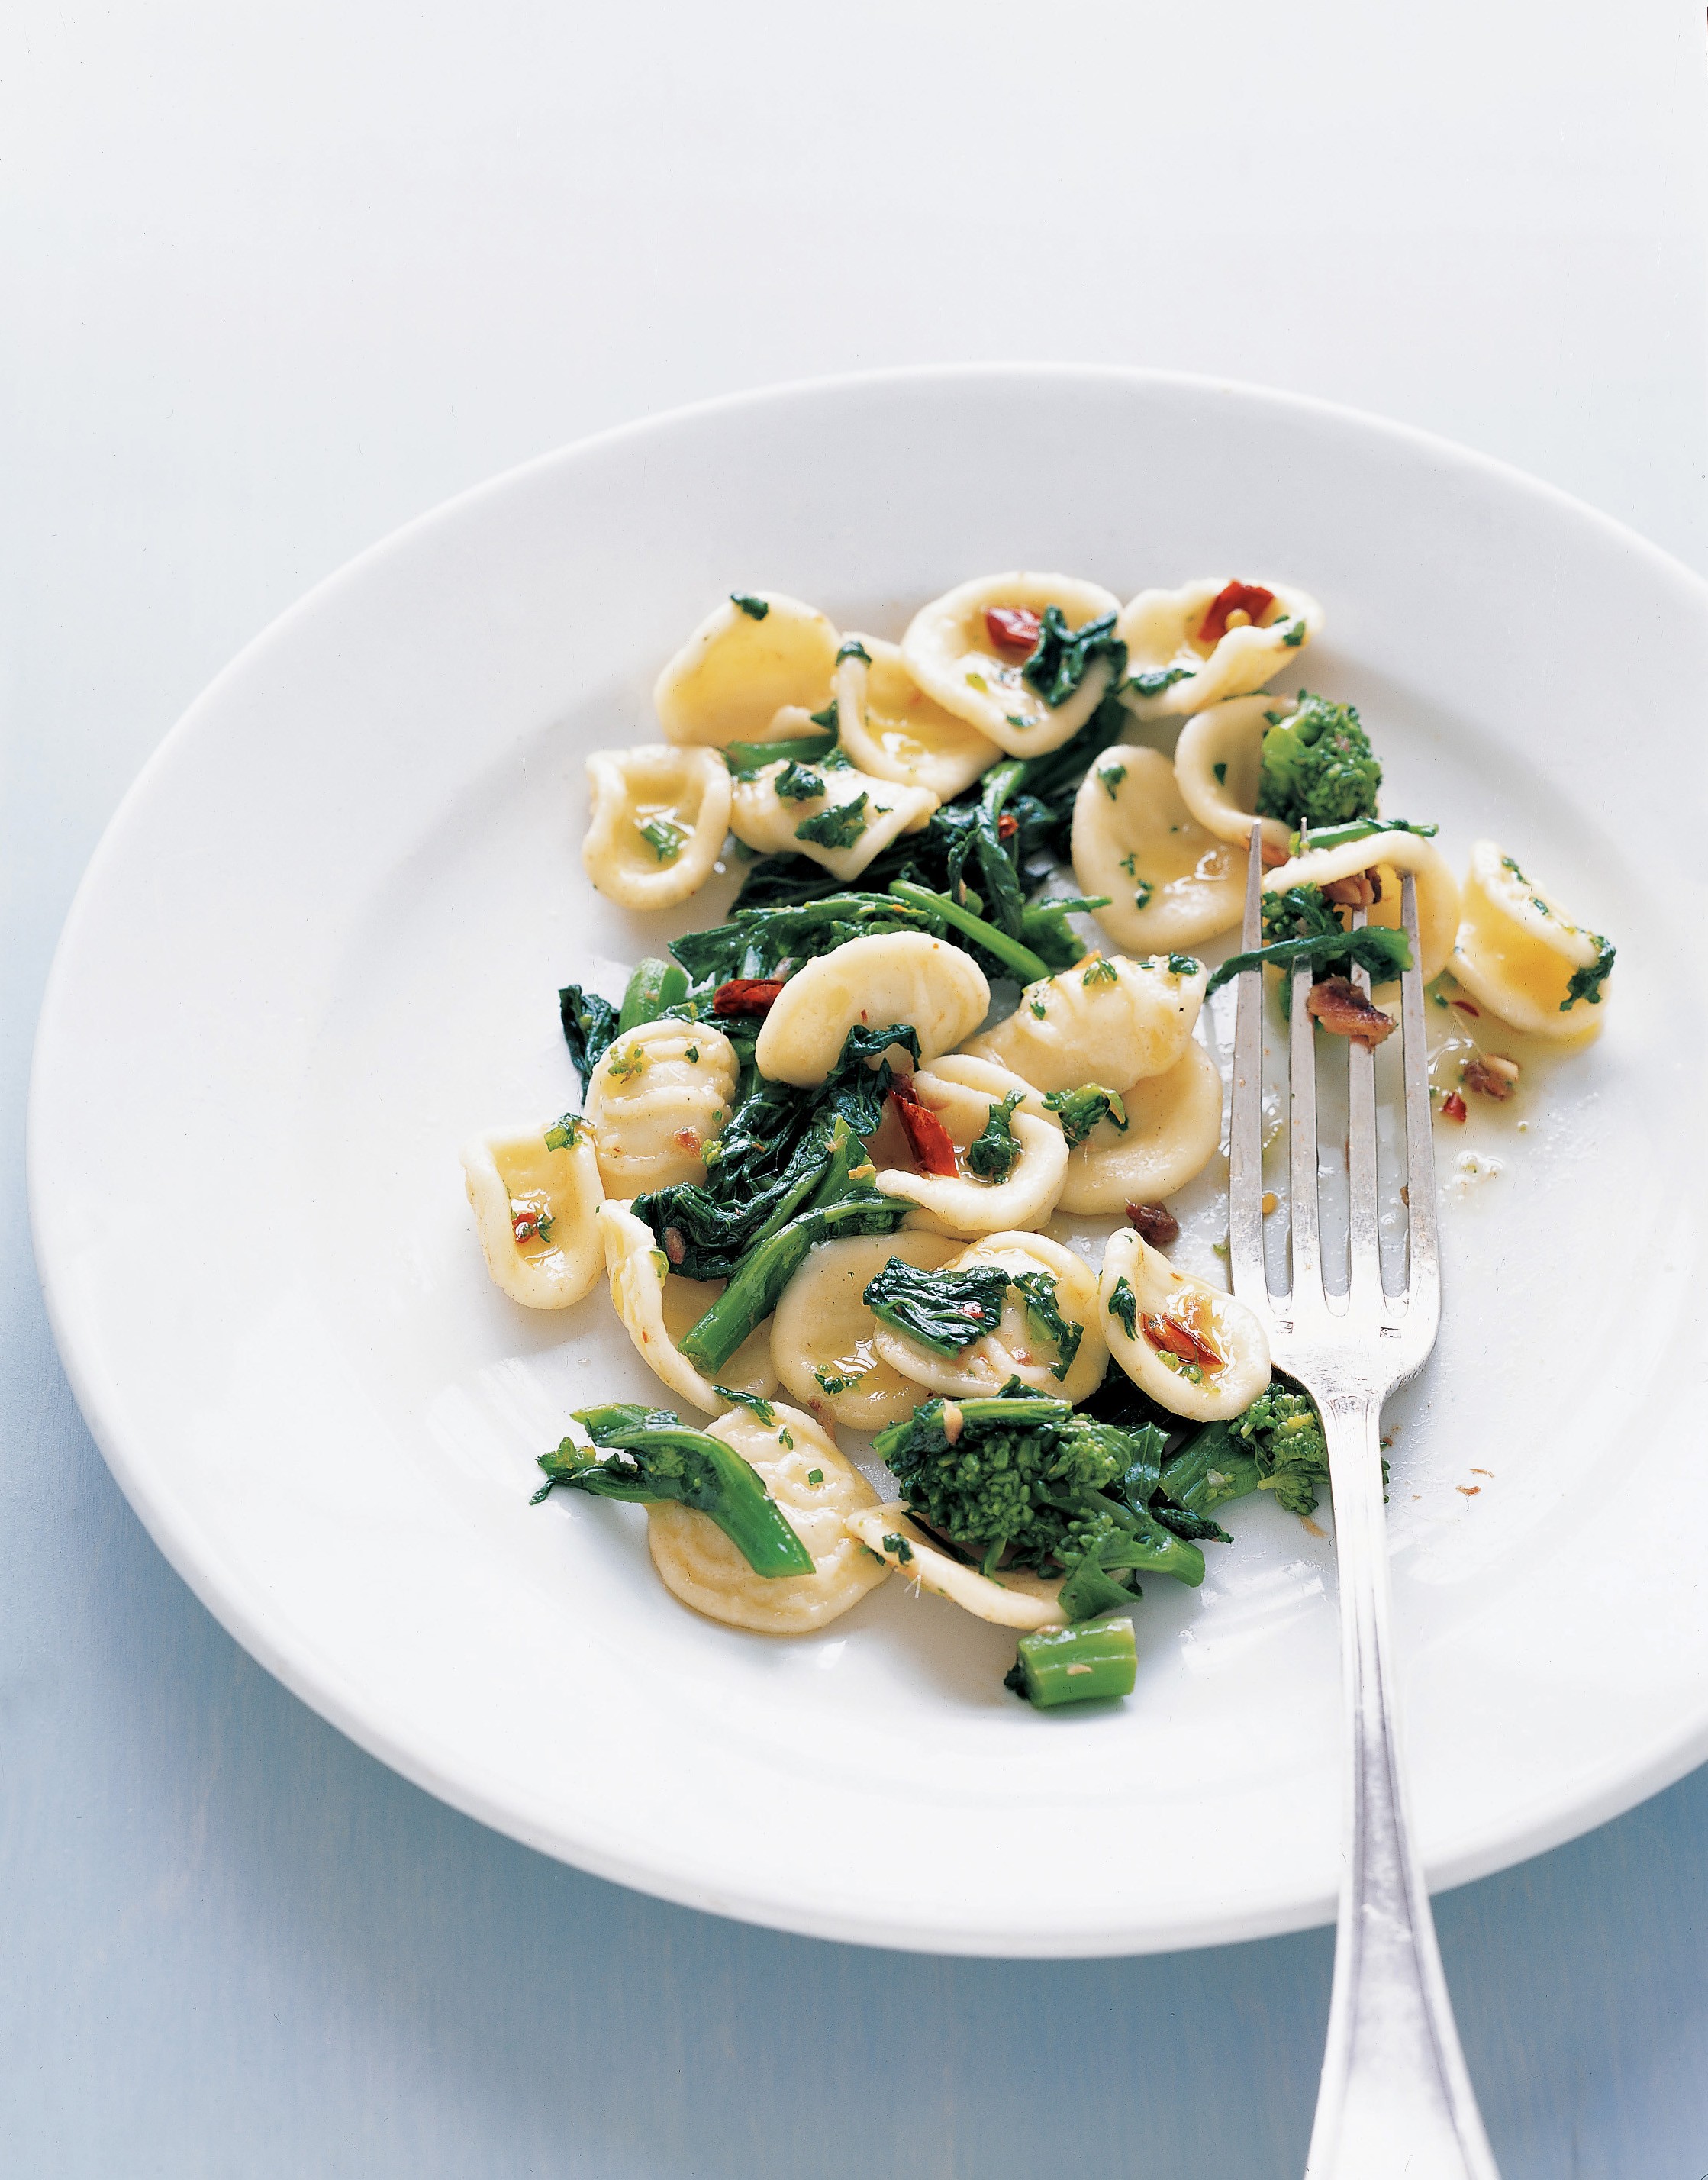 Orecchiette with Broccoli Rabe from How to Cook Italian by Giuliano Hazan